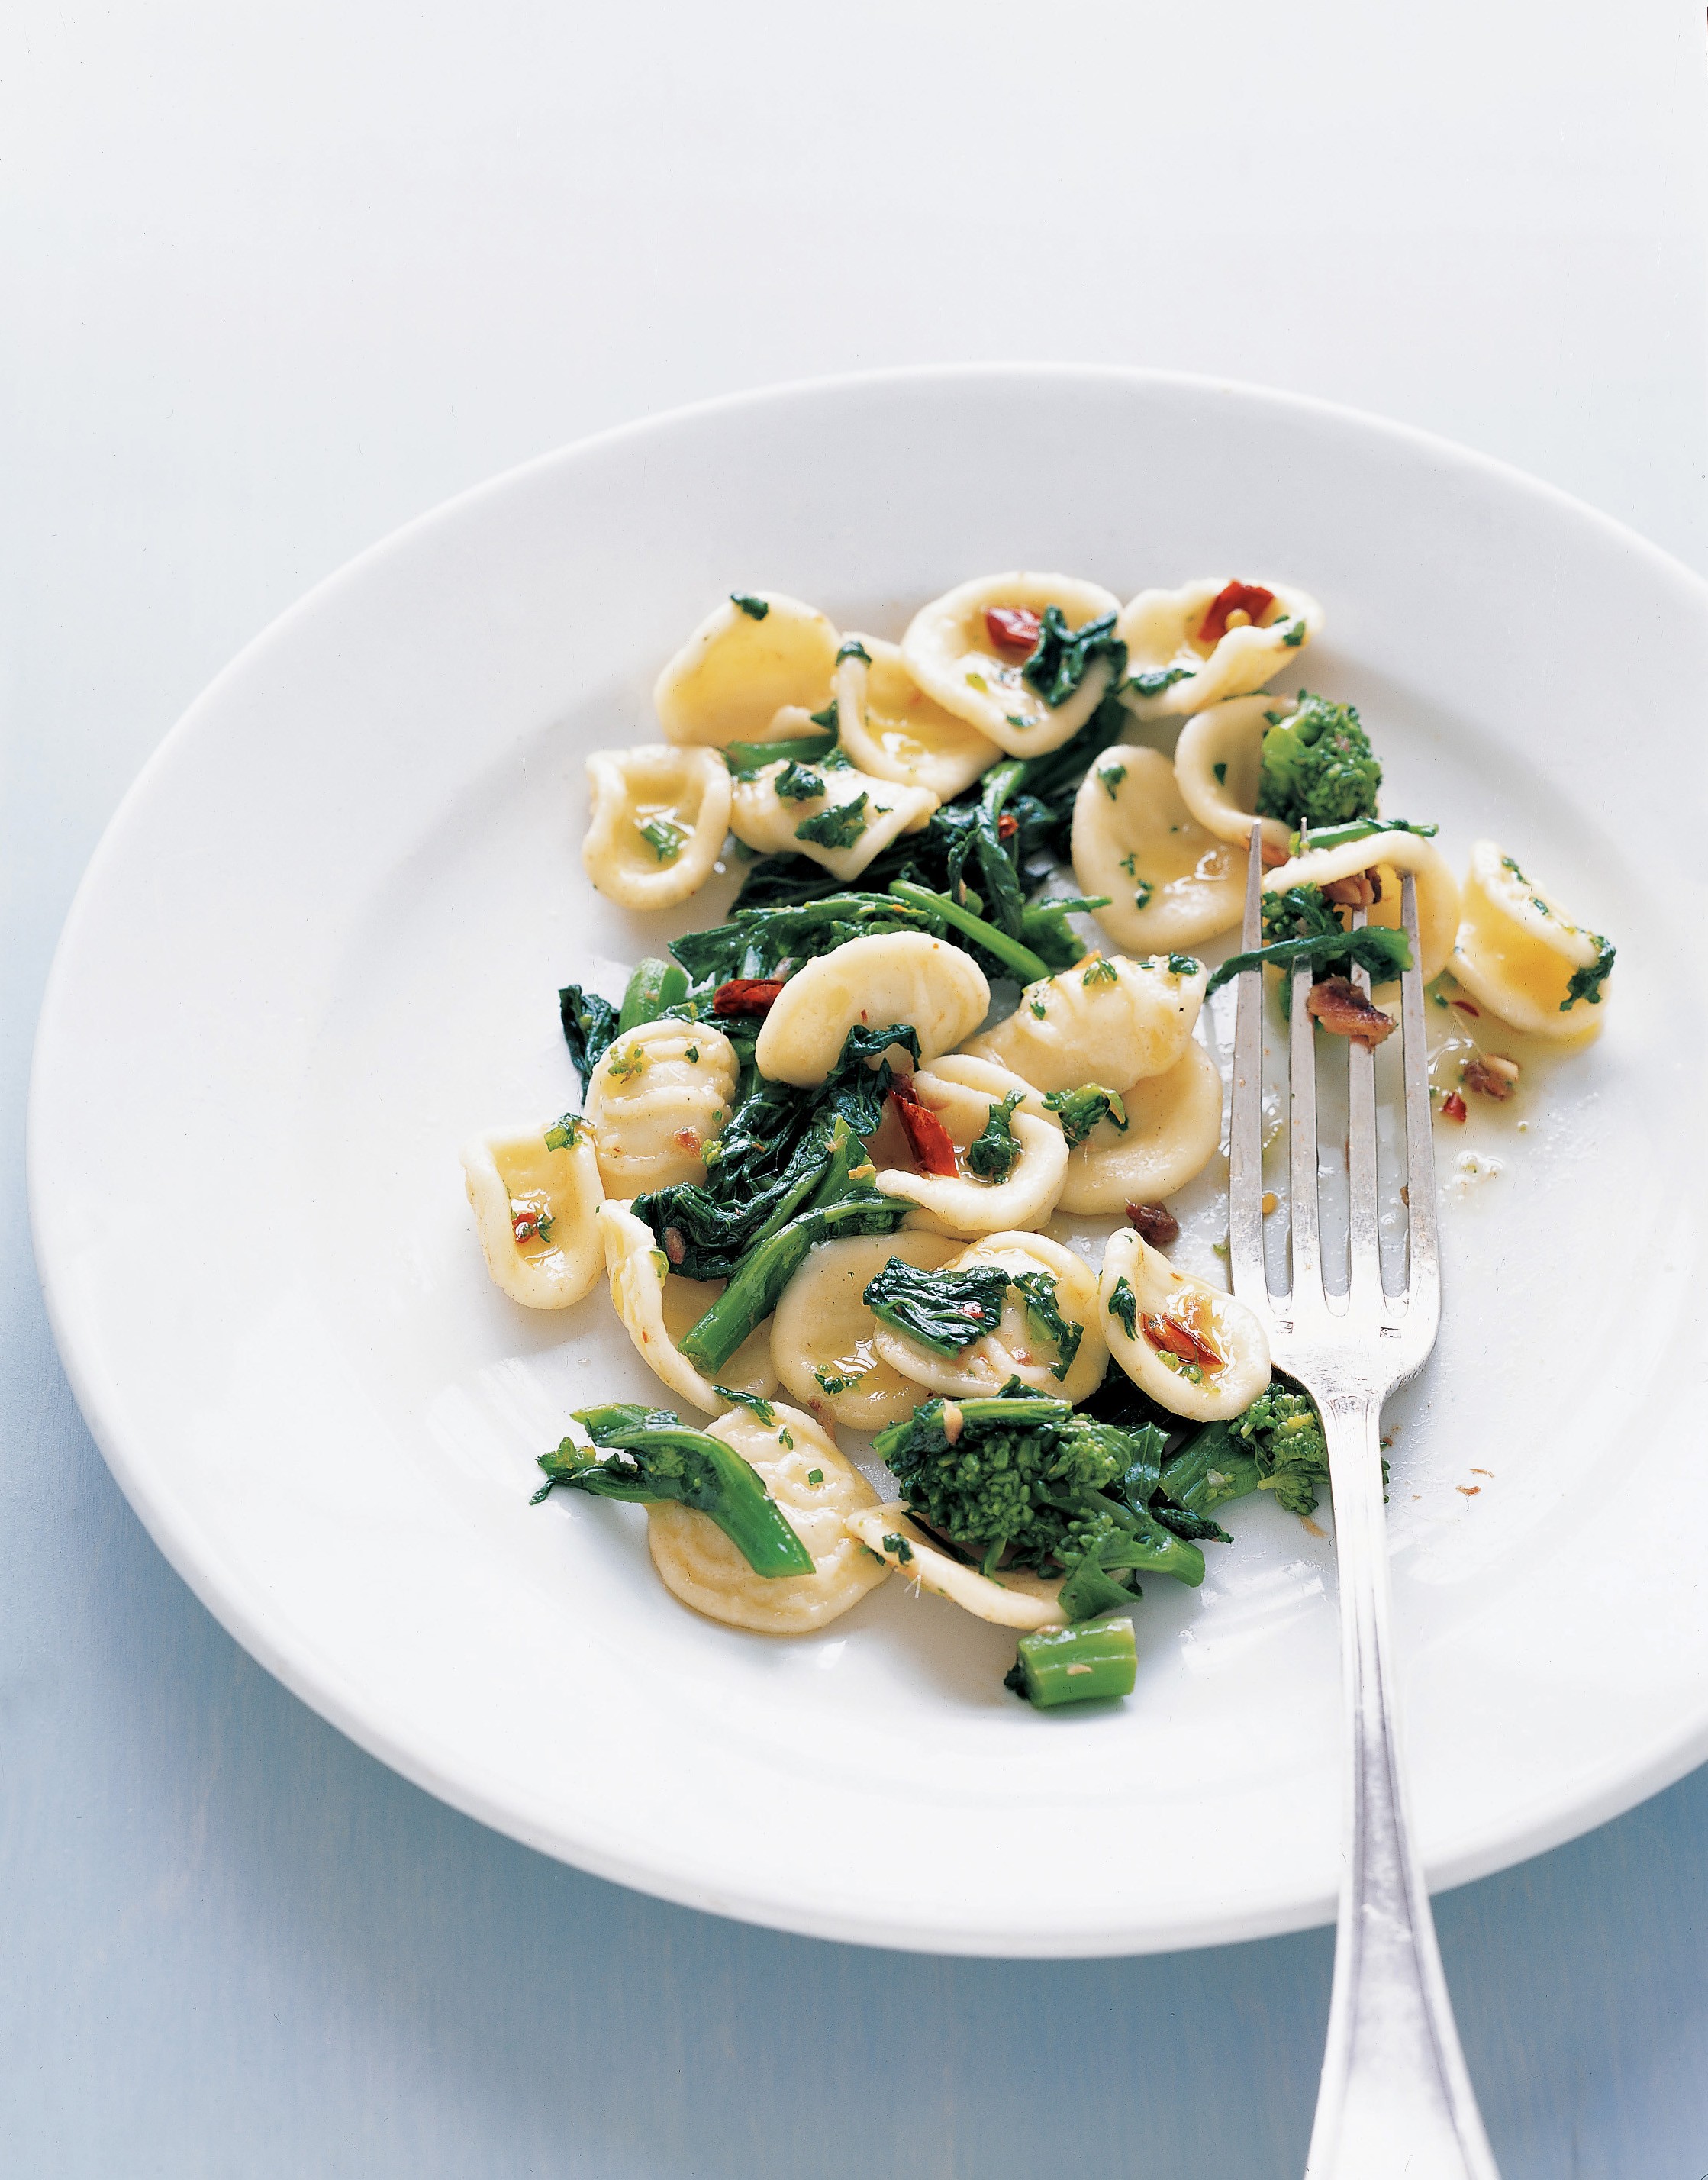 Orecchiette with Broccoli Rabe from How to Cook Italian by Giuliano Hazan